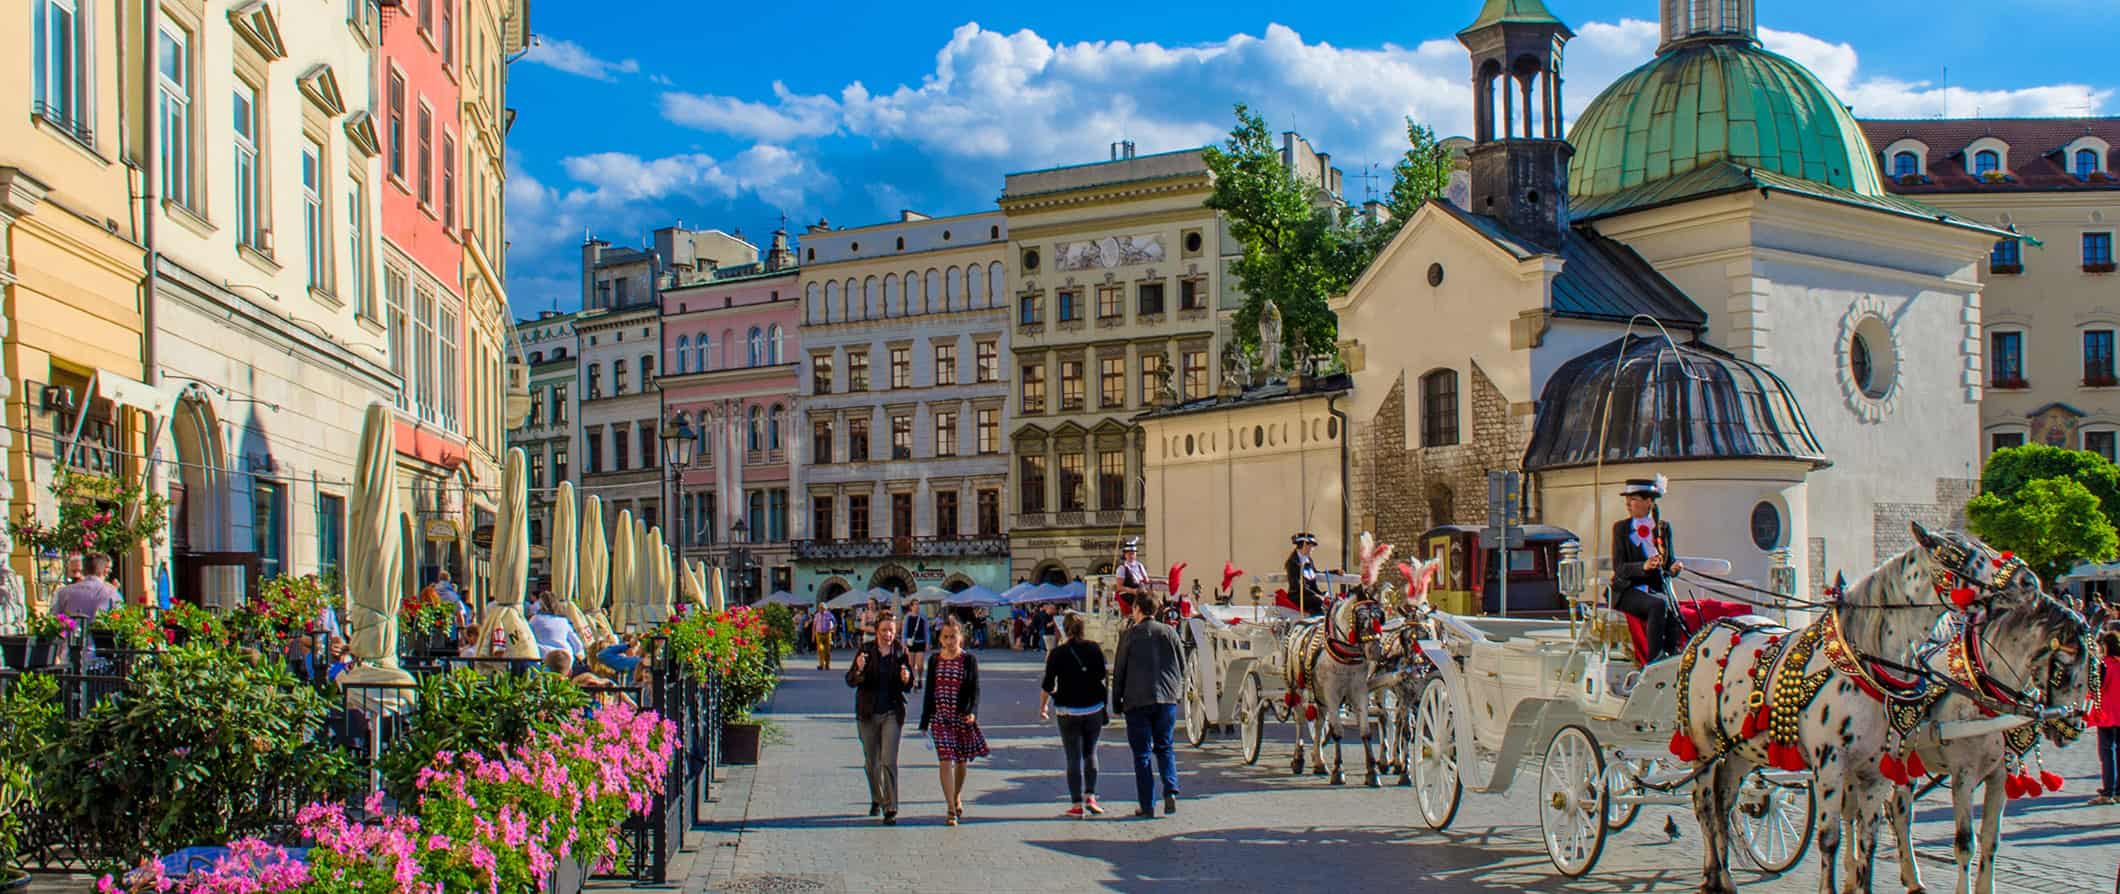 view of Krakow's historical city square